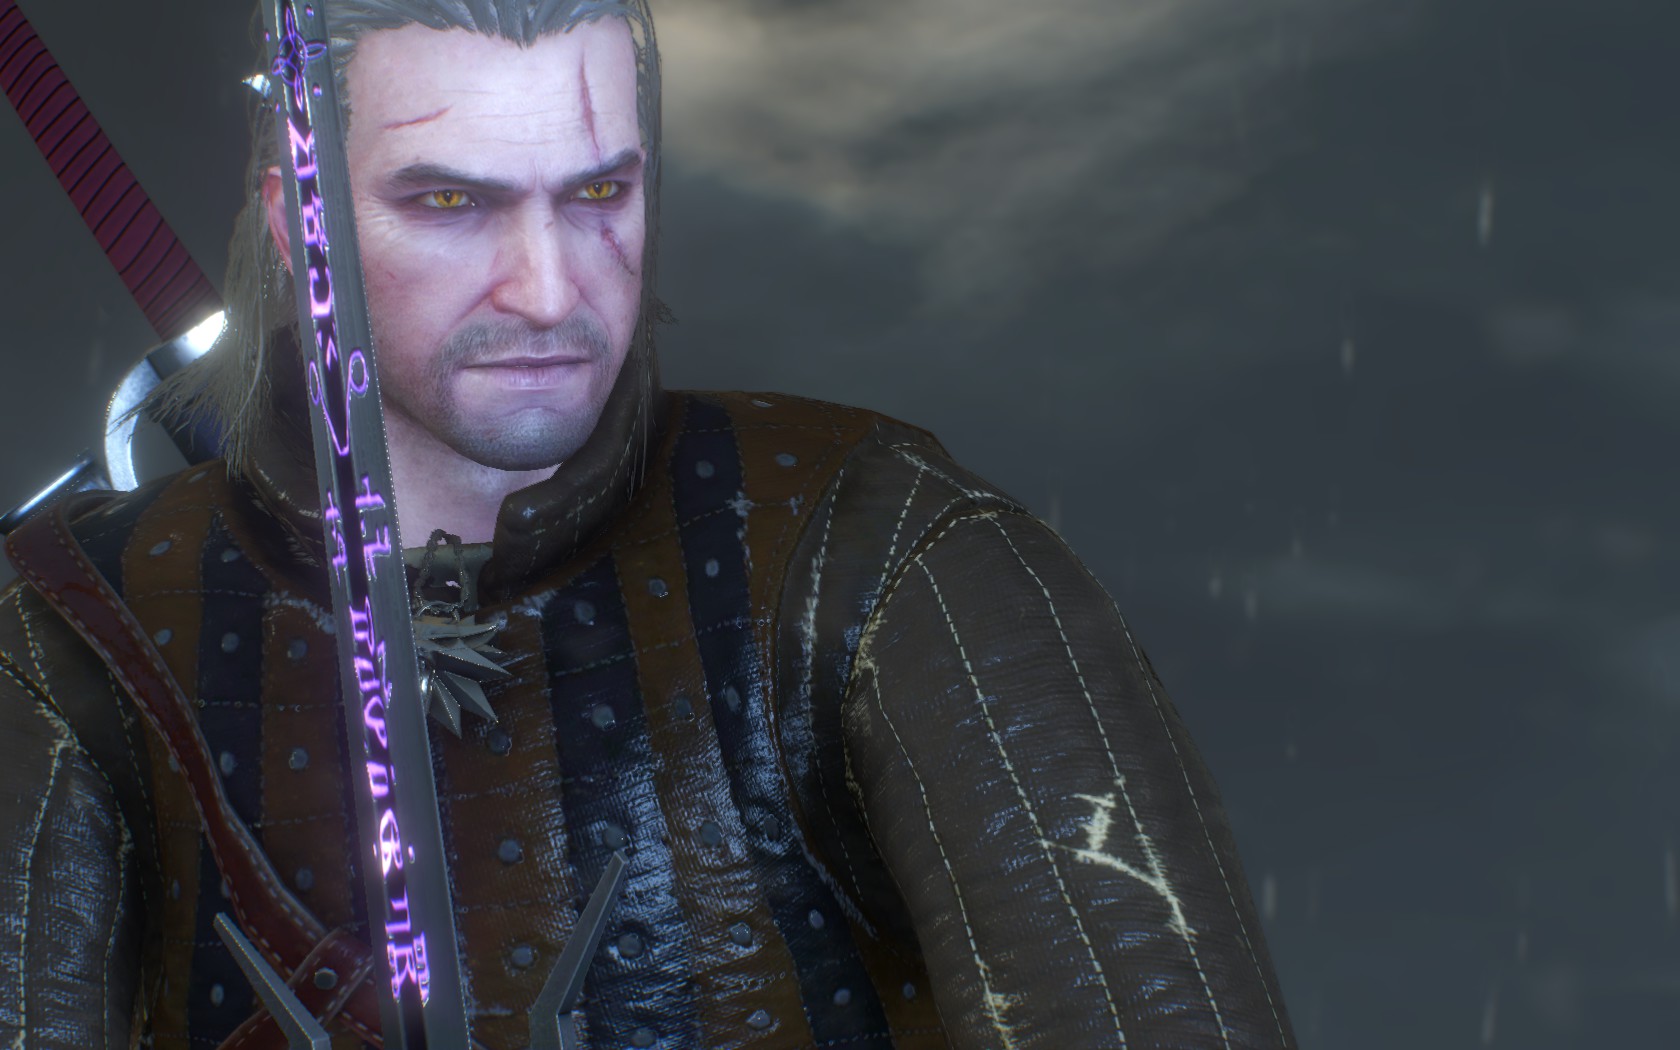 The Best The Witcher Game, According to Critics